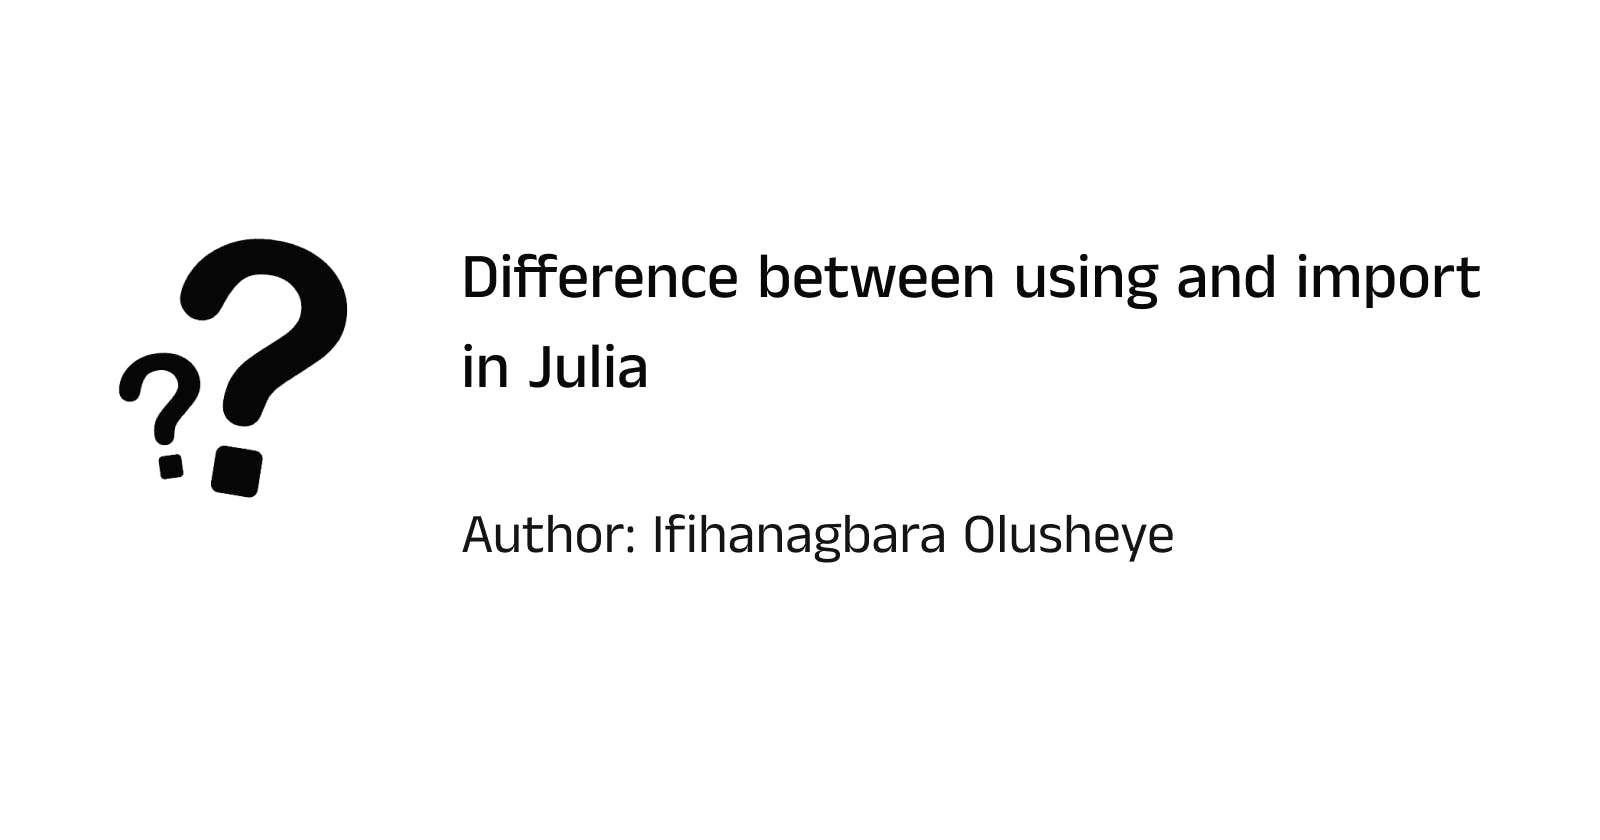 What's the difference between using and import in Julia?